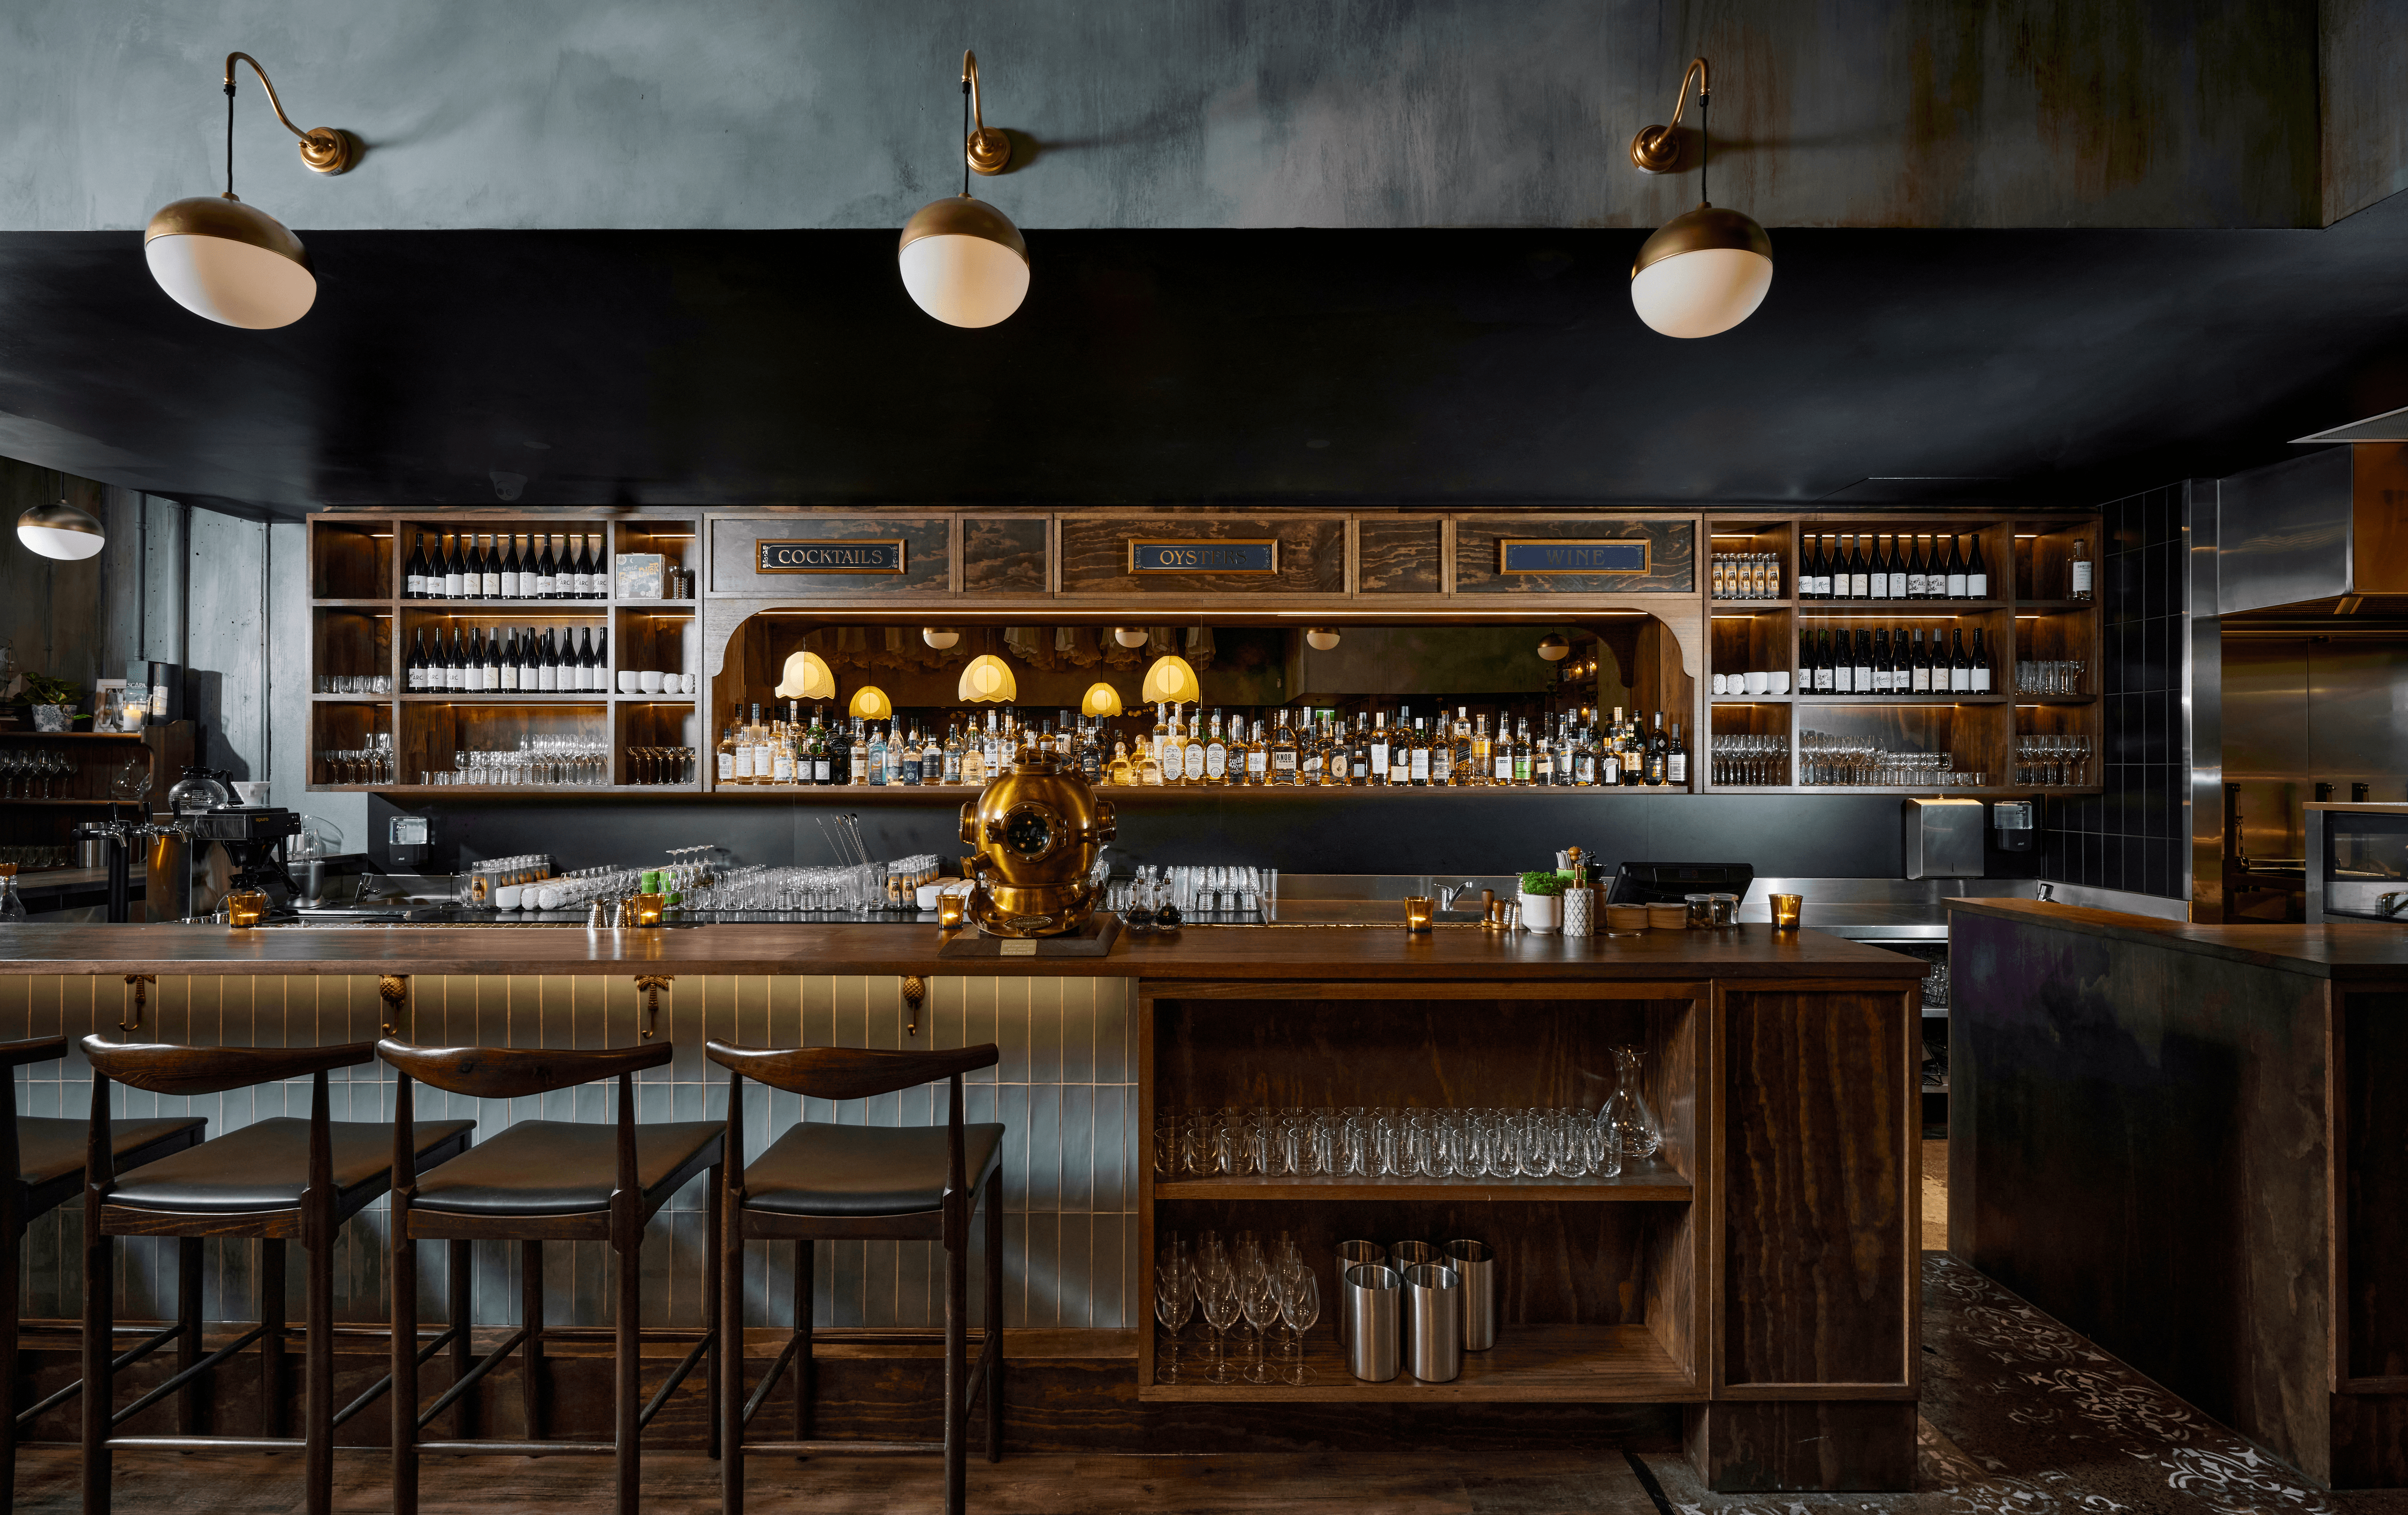 Chairs and bottles lined up at one of the best bars in Melbourne with pendant lights hanging.